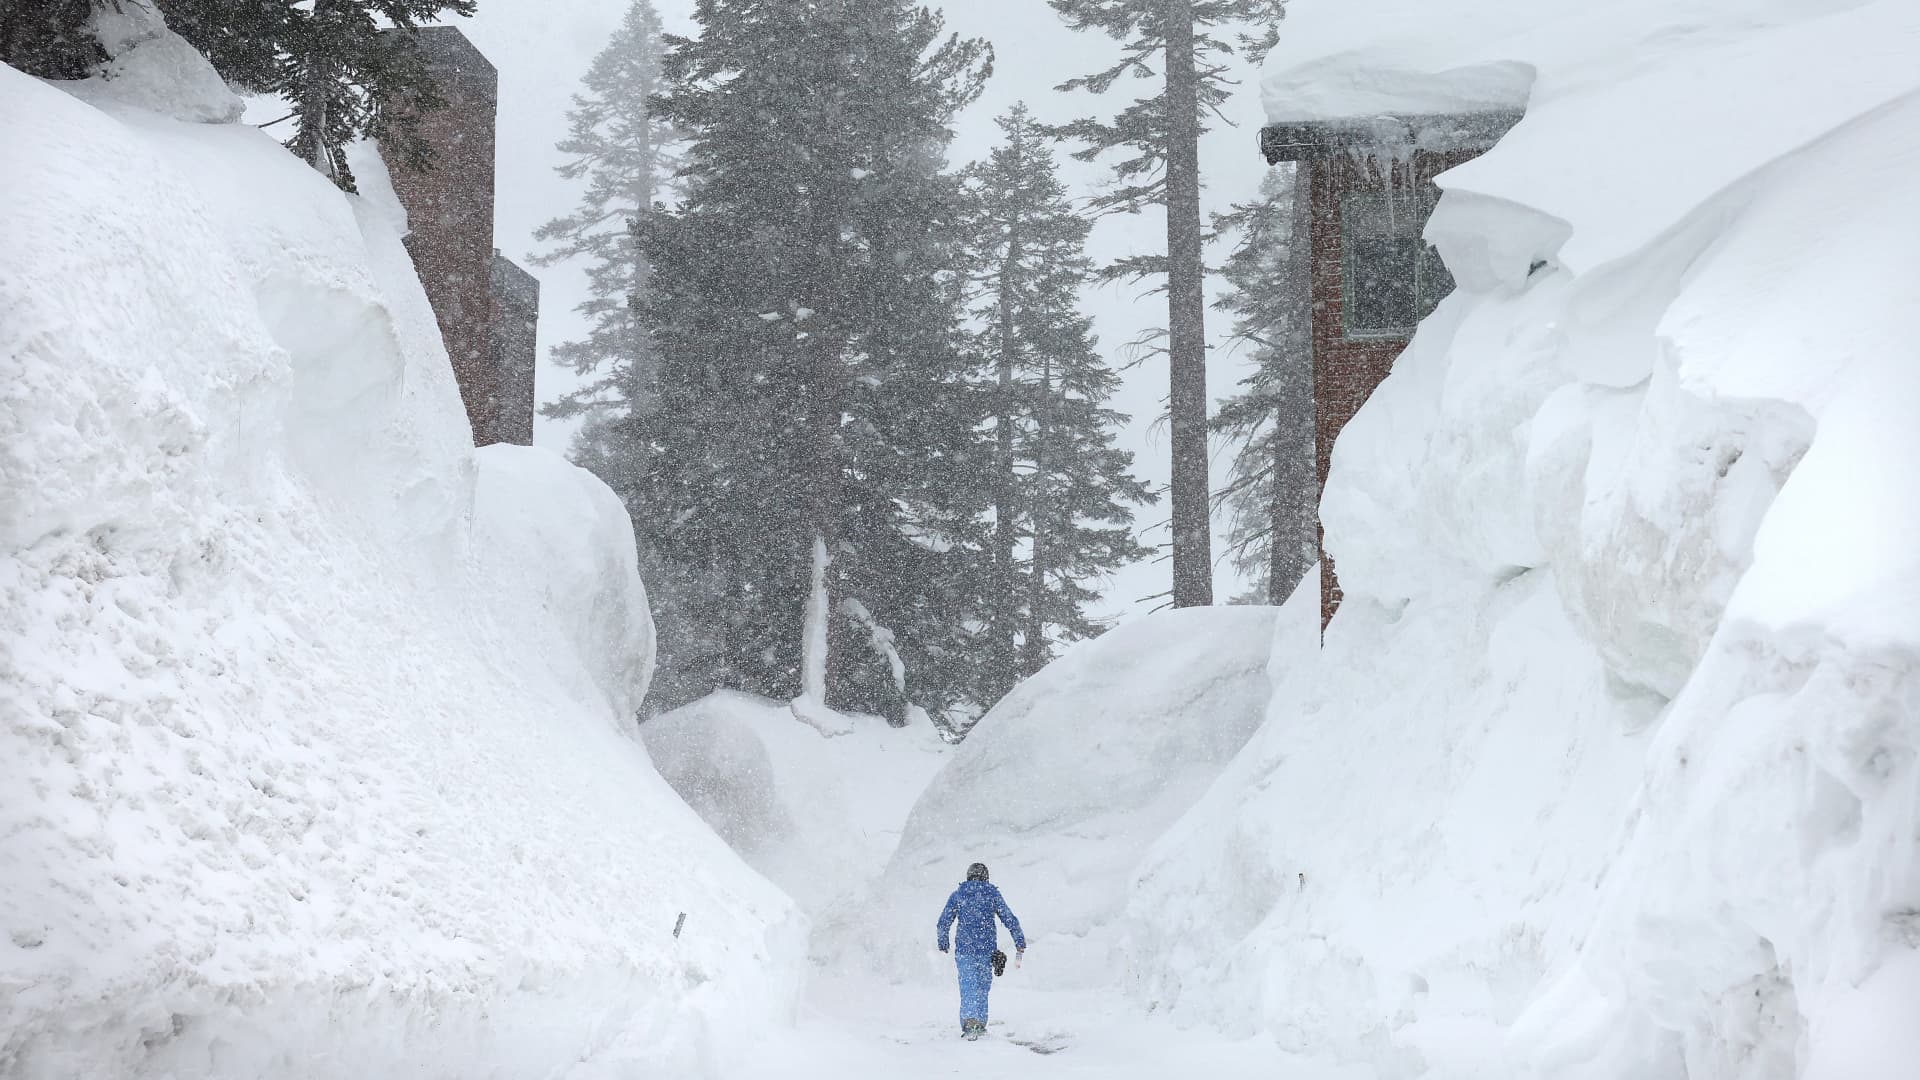 A person walks near snowbanks obscuring condominiums as snow falls in the Sierra Nevada mountains from yet another storm system which is predicted to bring heavy snow to higher elevations on March 28, 2023 in Mammoth Lakes, California.